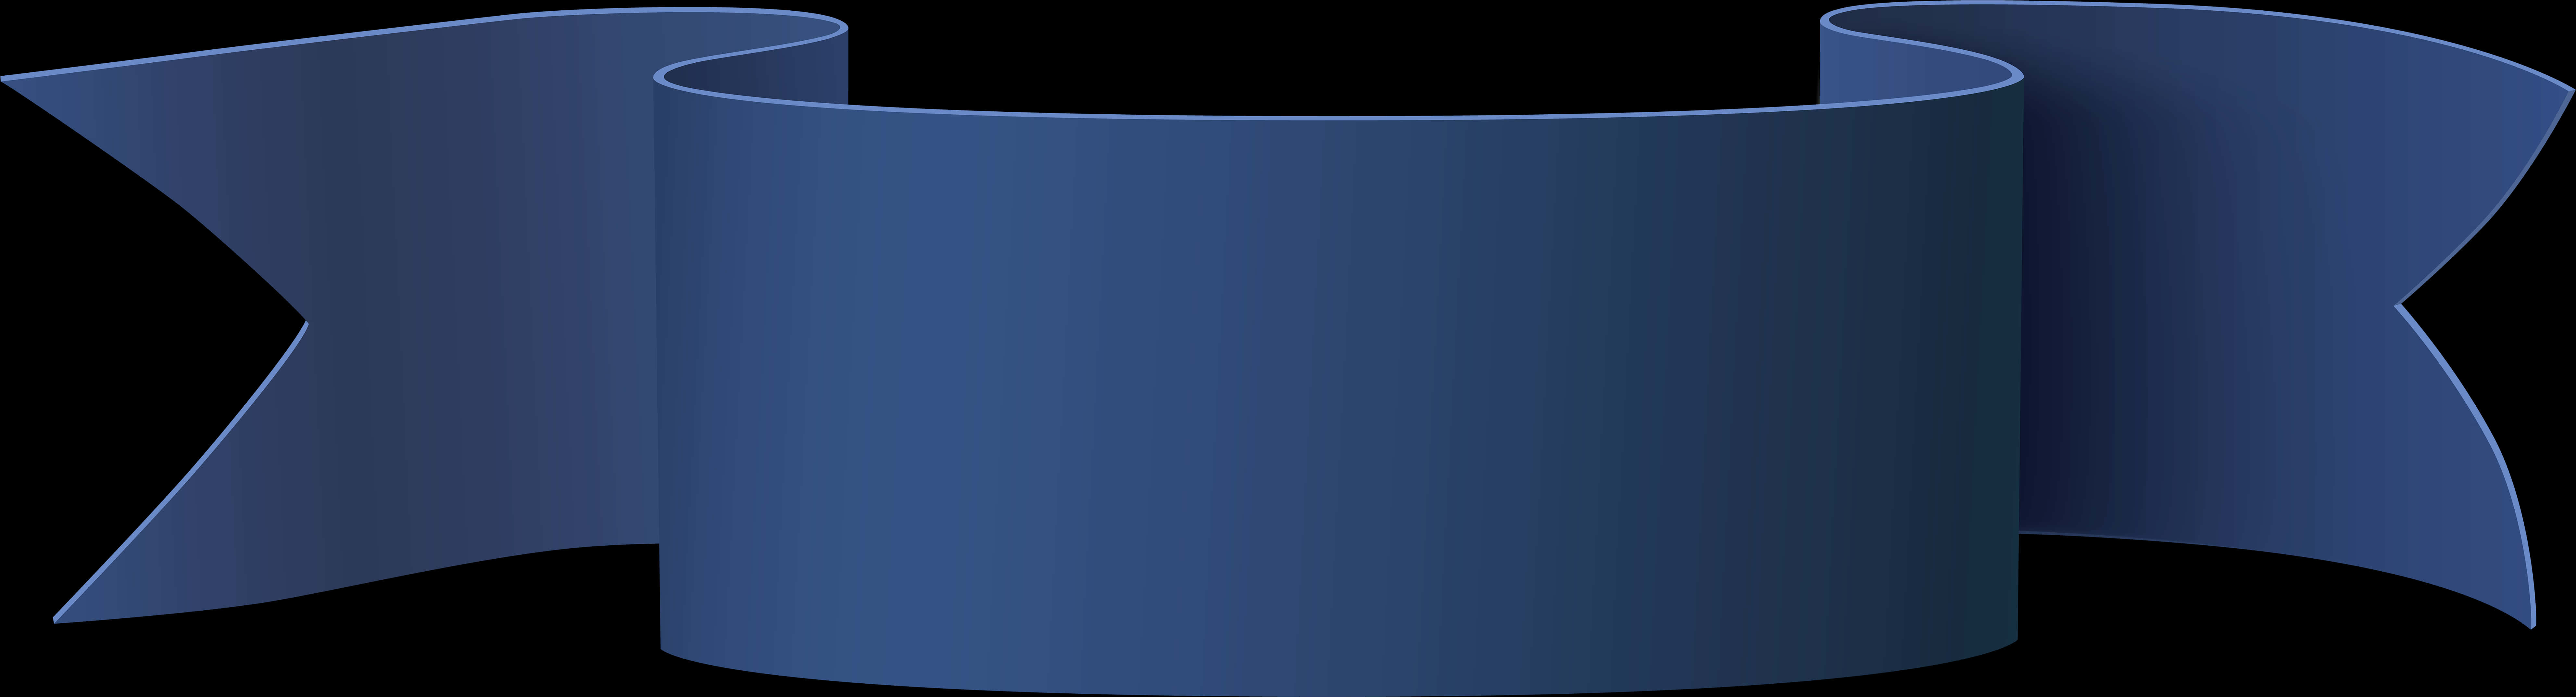 A Blue Cylinder With Black Background